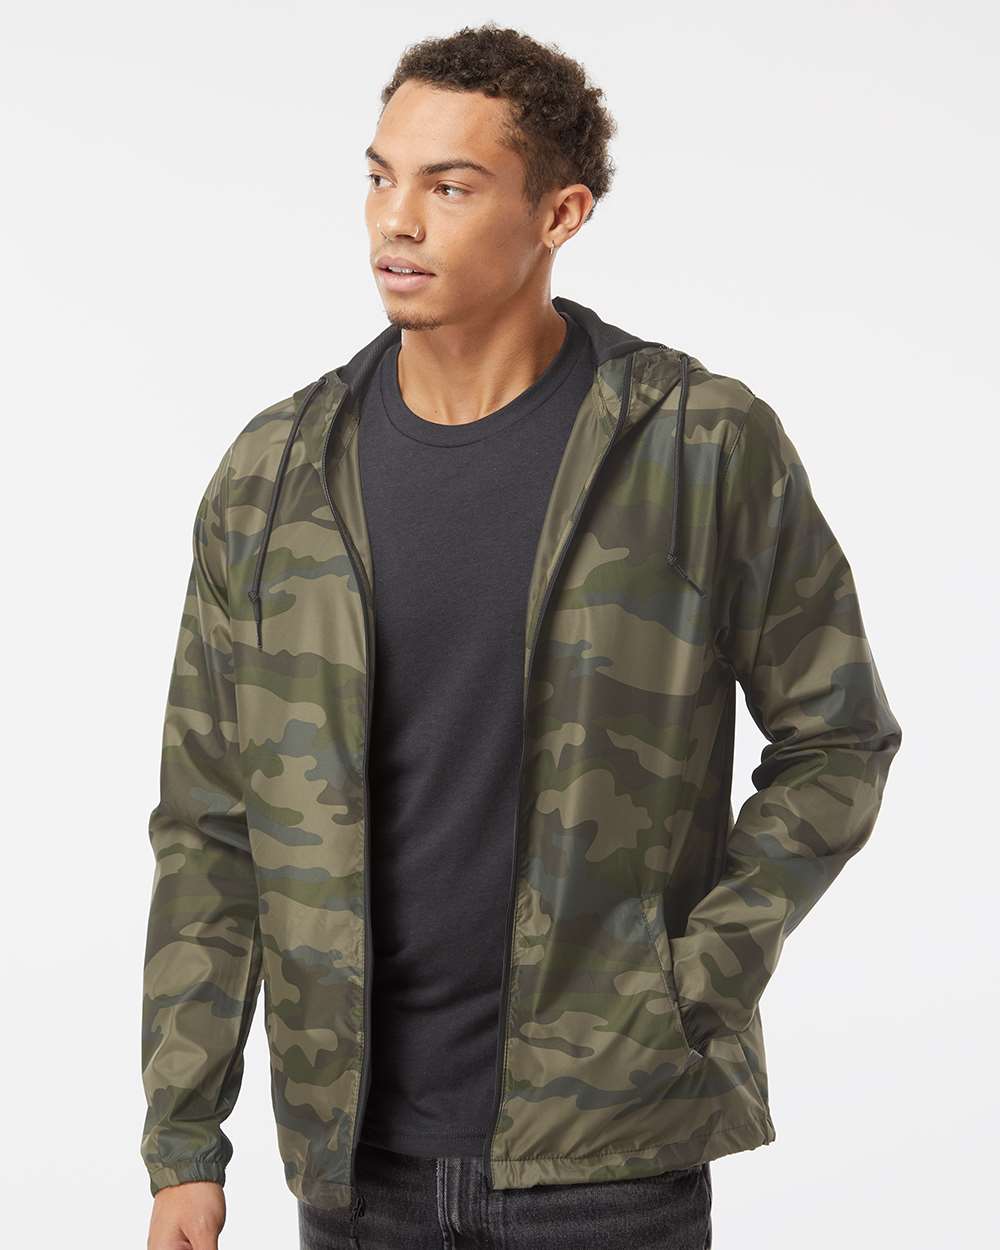 Independent Trading Co. Unisex Lightweight Windbreaker Full-Zip Jacket EXP54LWZ #colormdl_Forest Camo